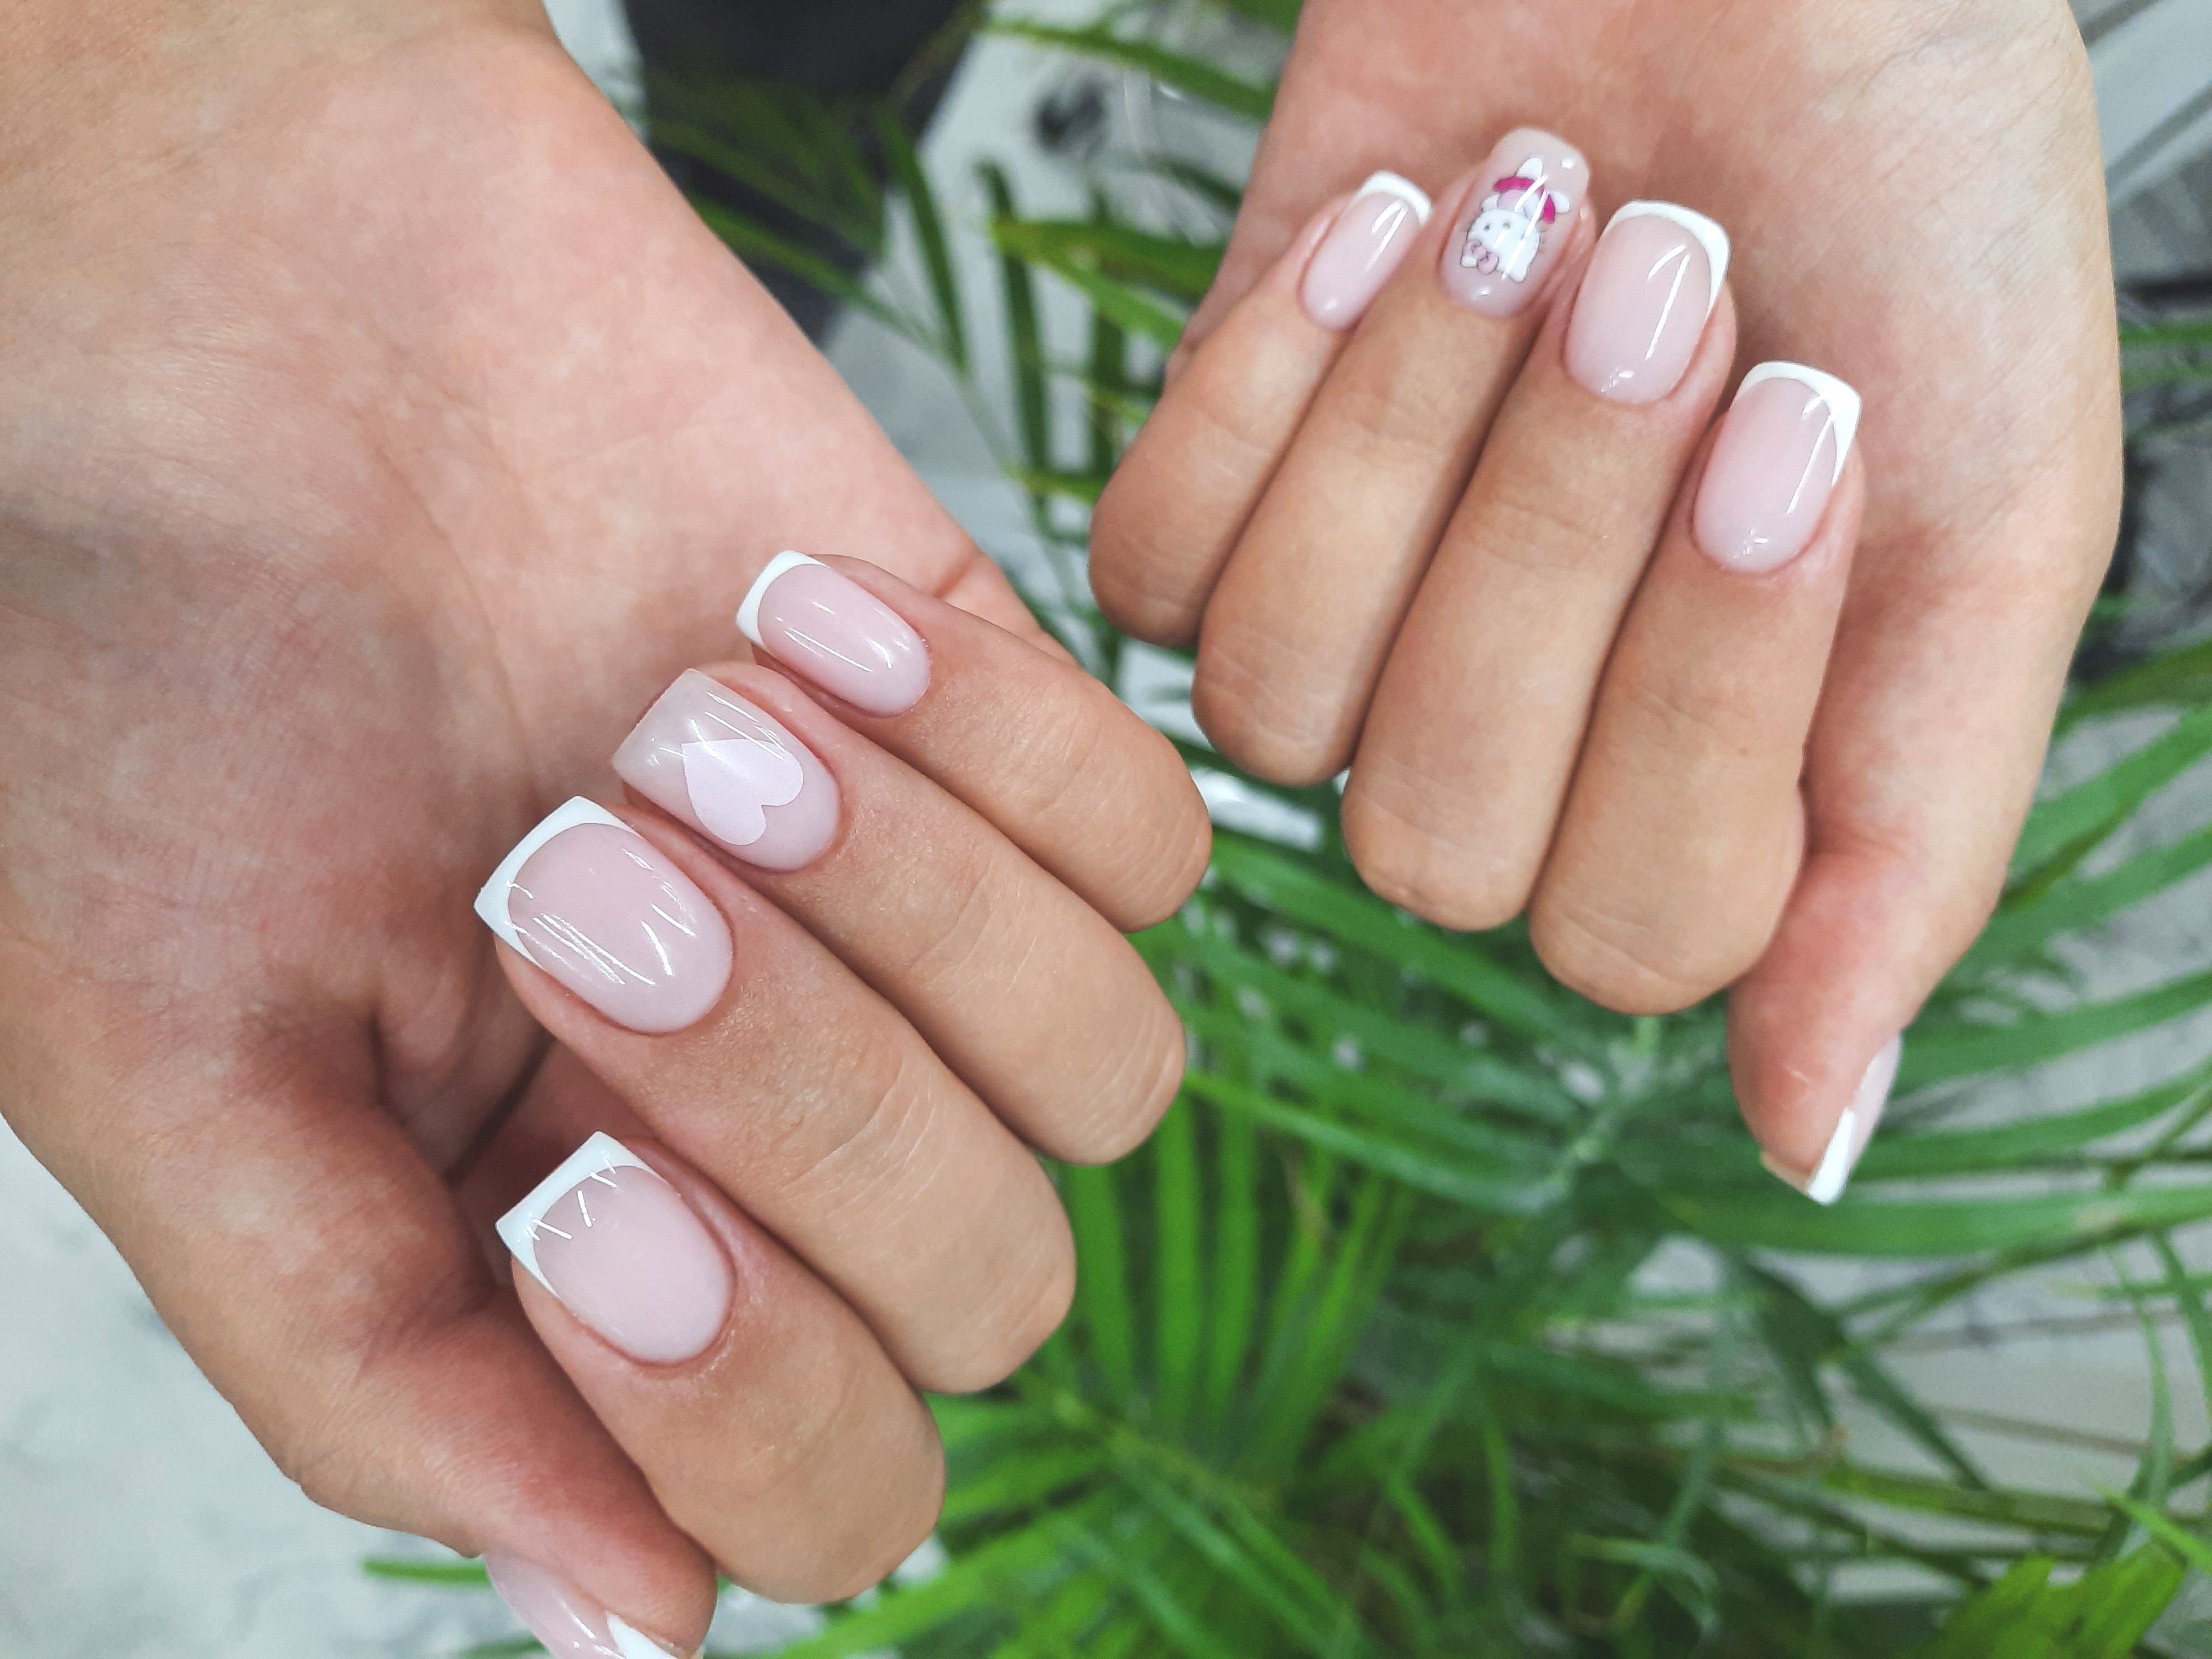 4 nail trends that are in and 4 that are out right now, according to nail artists